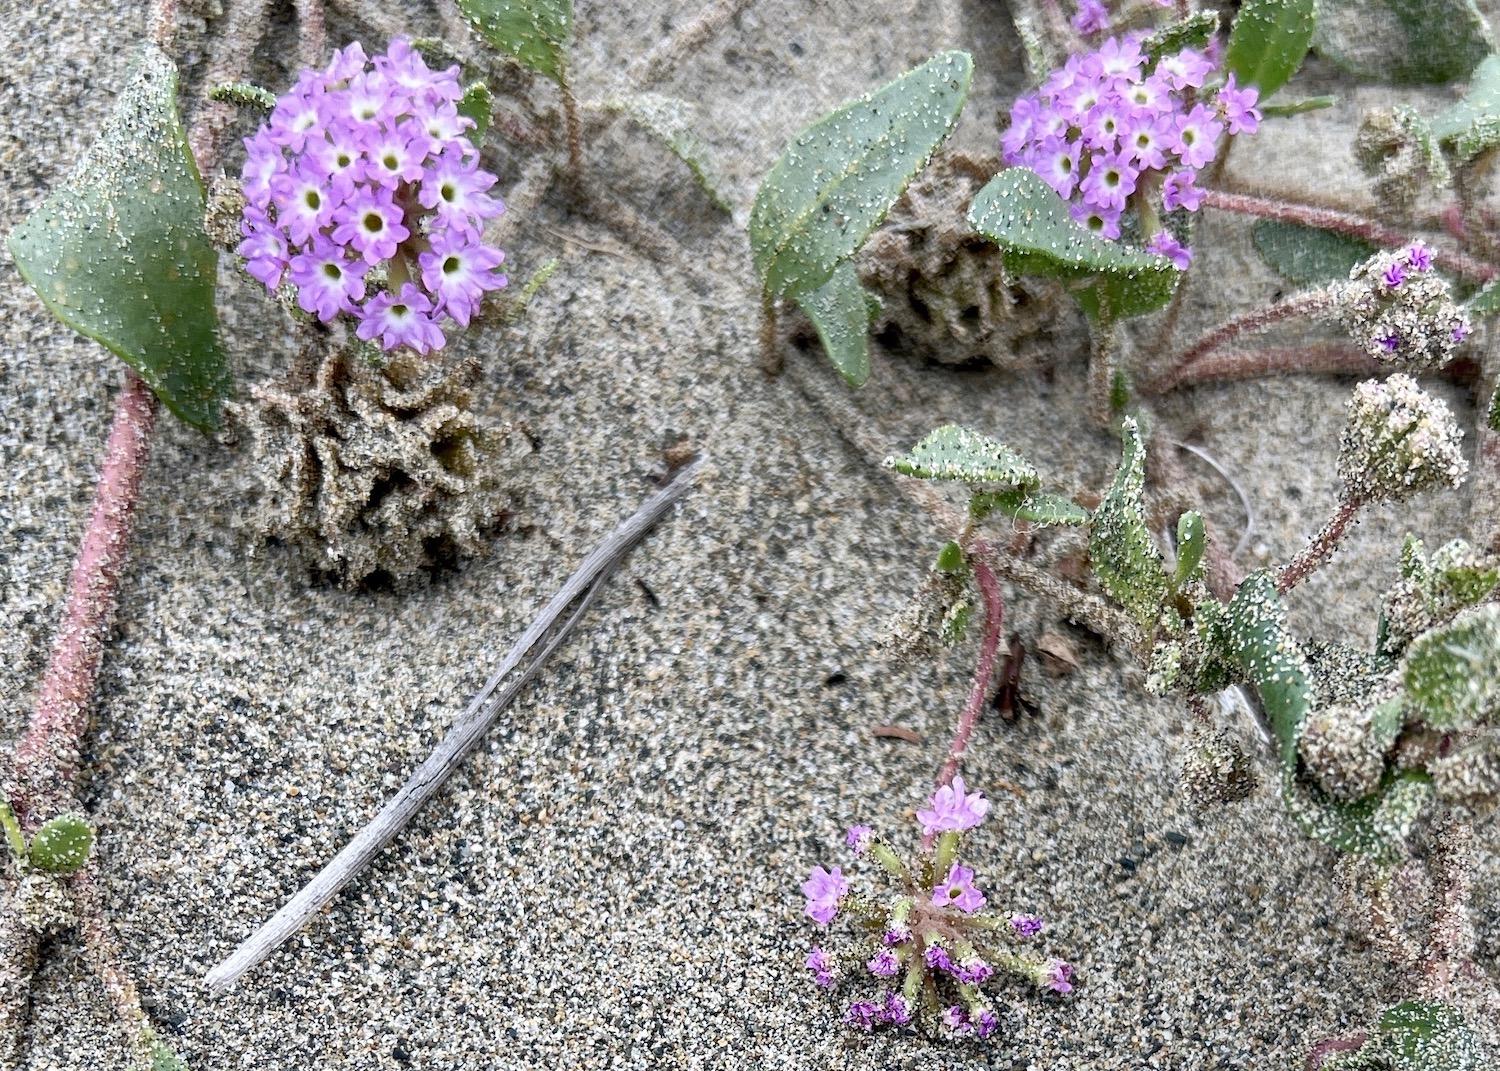 We didn't see any fresh evidence of wolves on Wickaninnish Beach, only endangered Pink Sand-verbena.